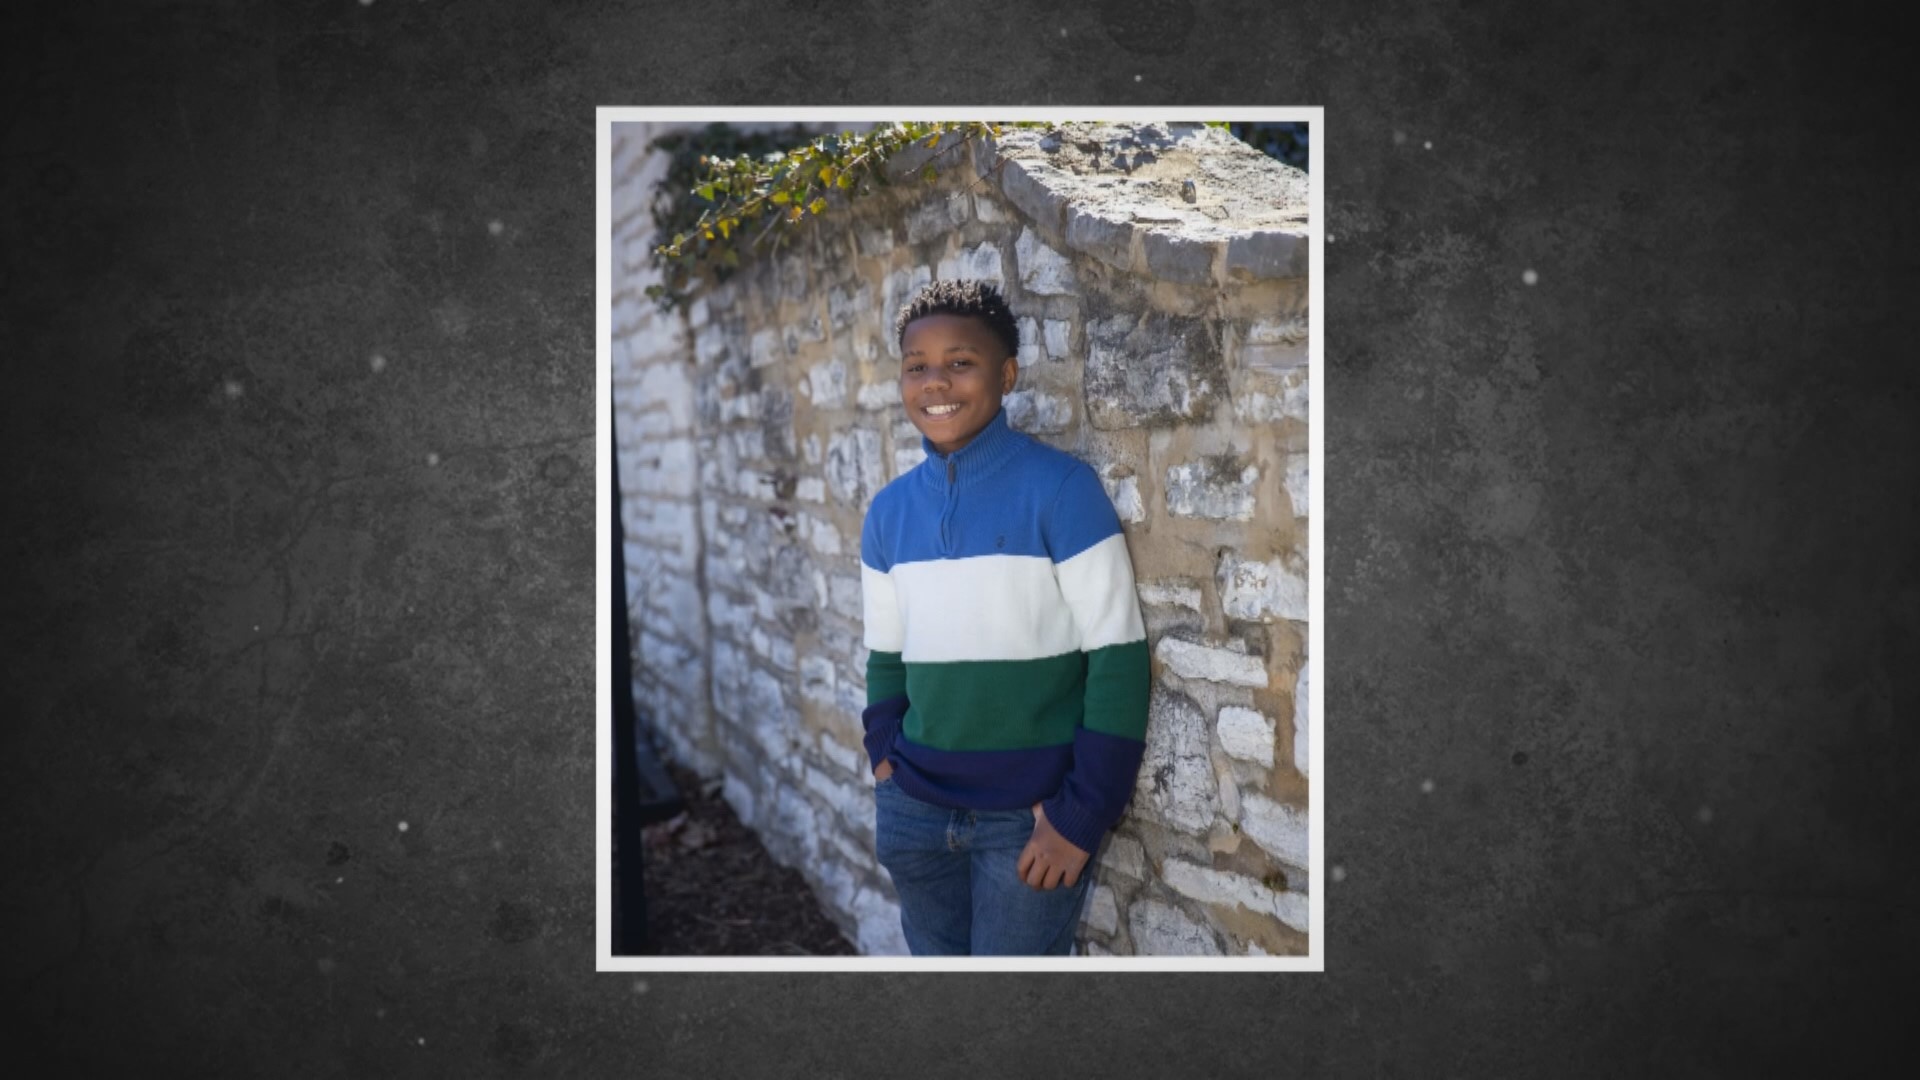 In today's A Place to Call Home, you'll meet Brandon. He's a typical 12-year-old with a great smile and a love for all sports.